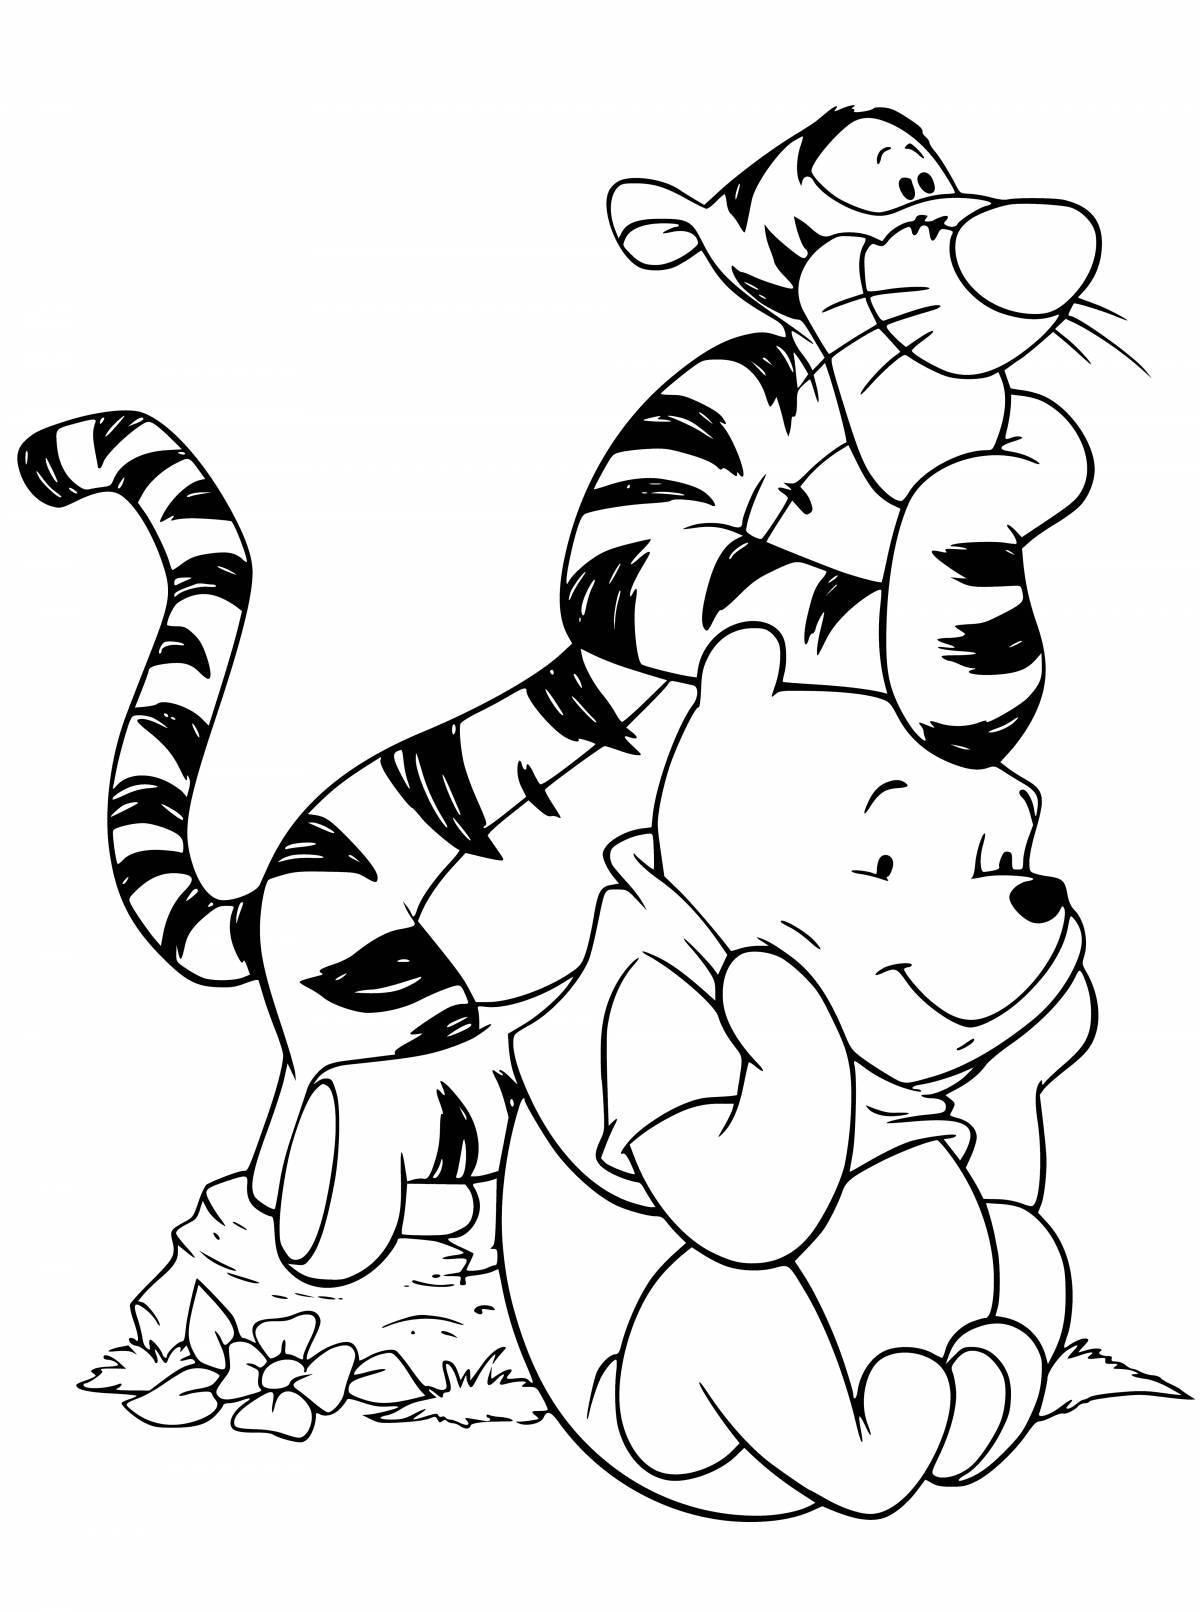 Color-explosion coloring page coloring book